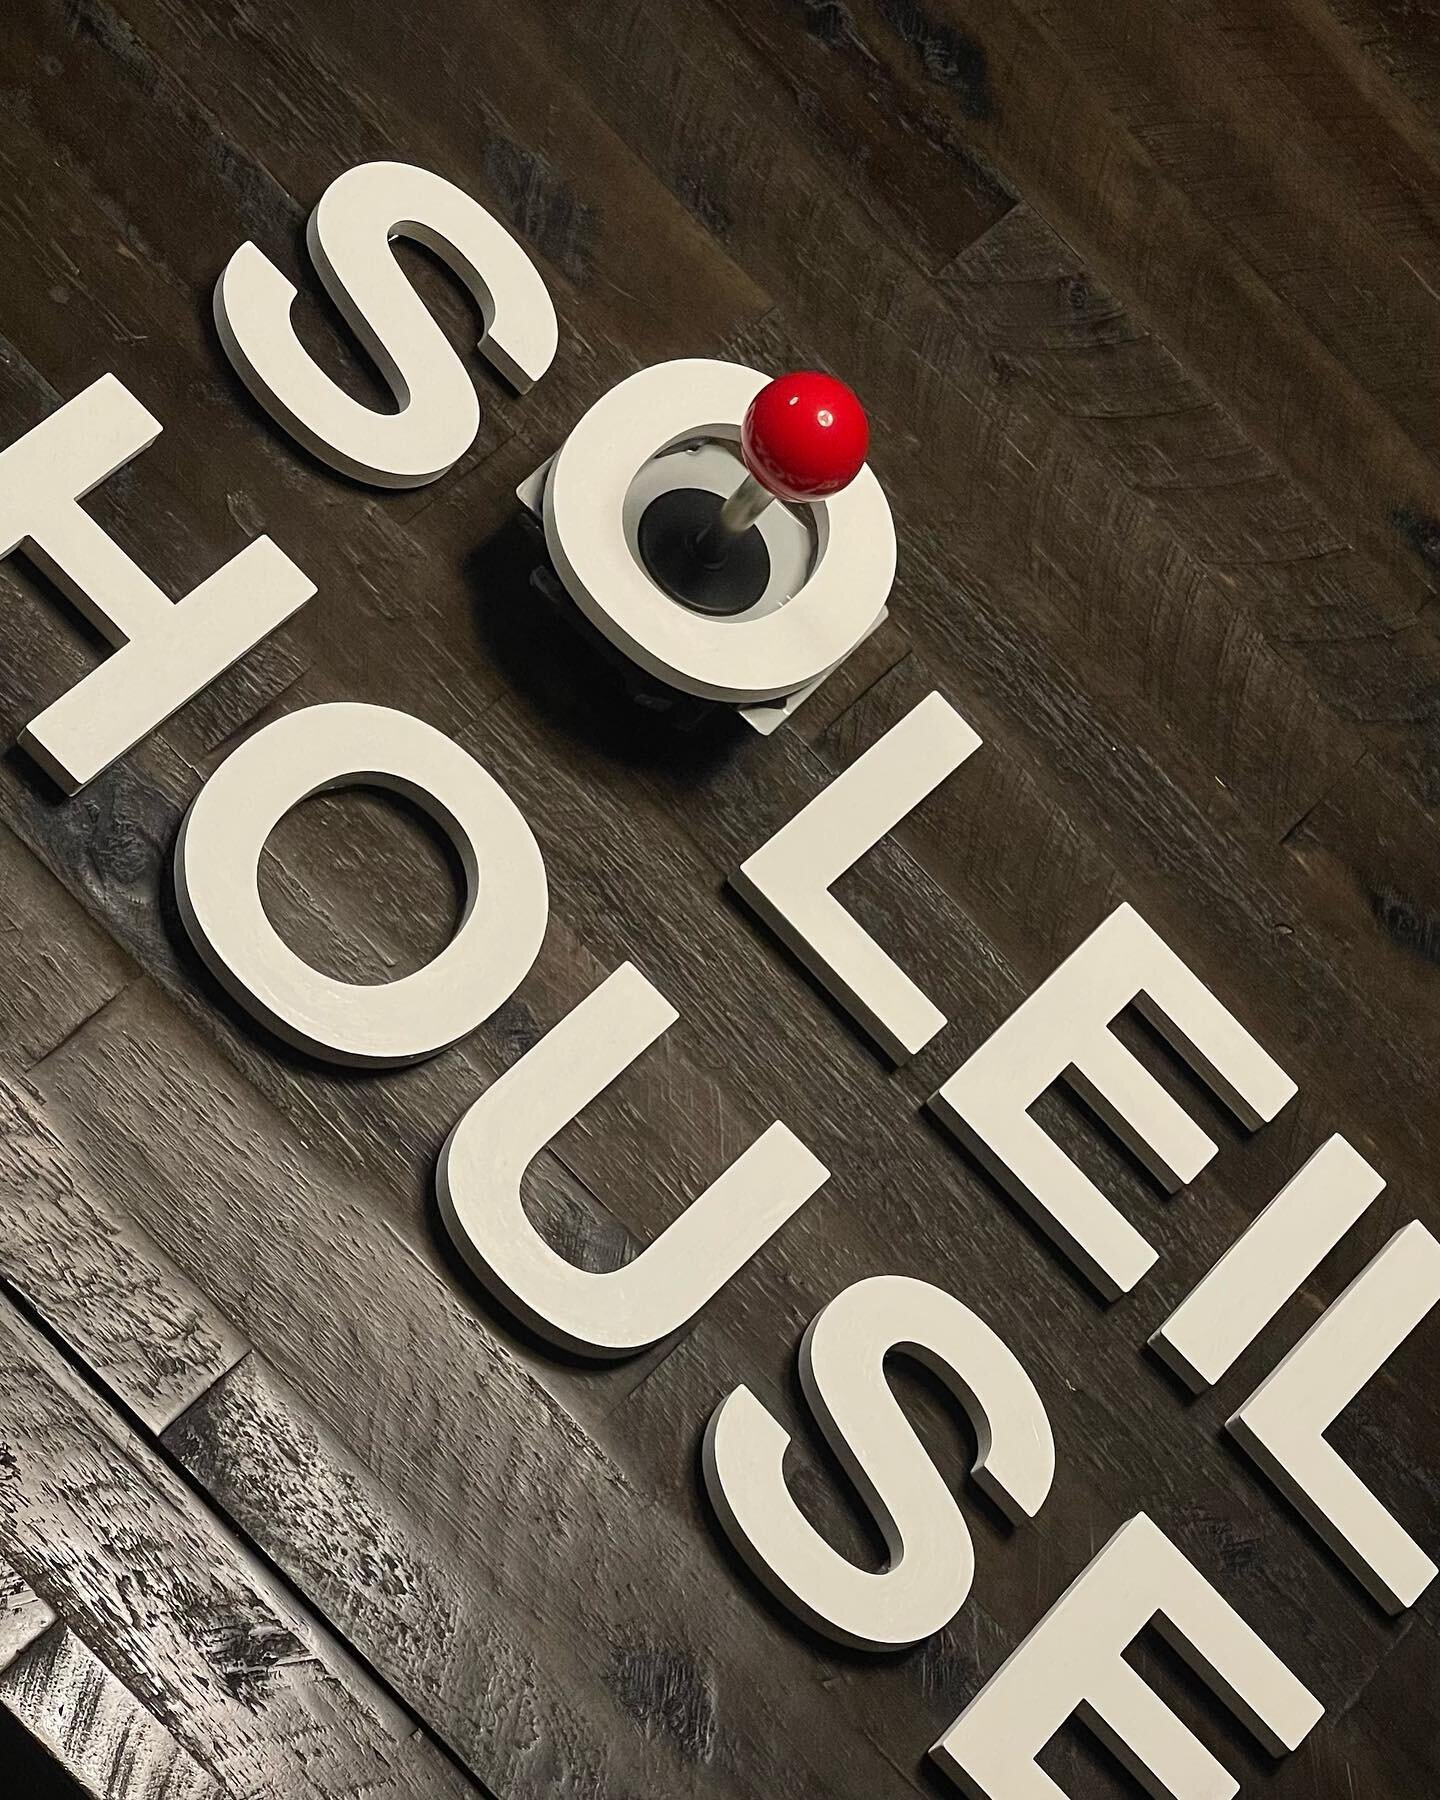 Prototyping a Joystick sign with graphics of a 📍map #staysoleil #galvestonisland #galveston